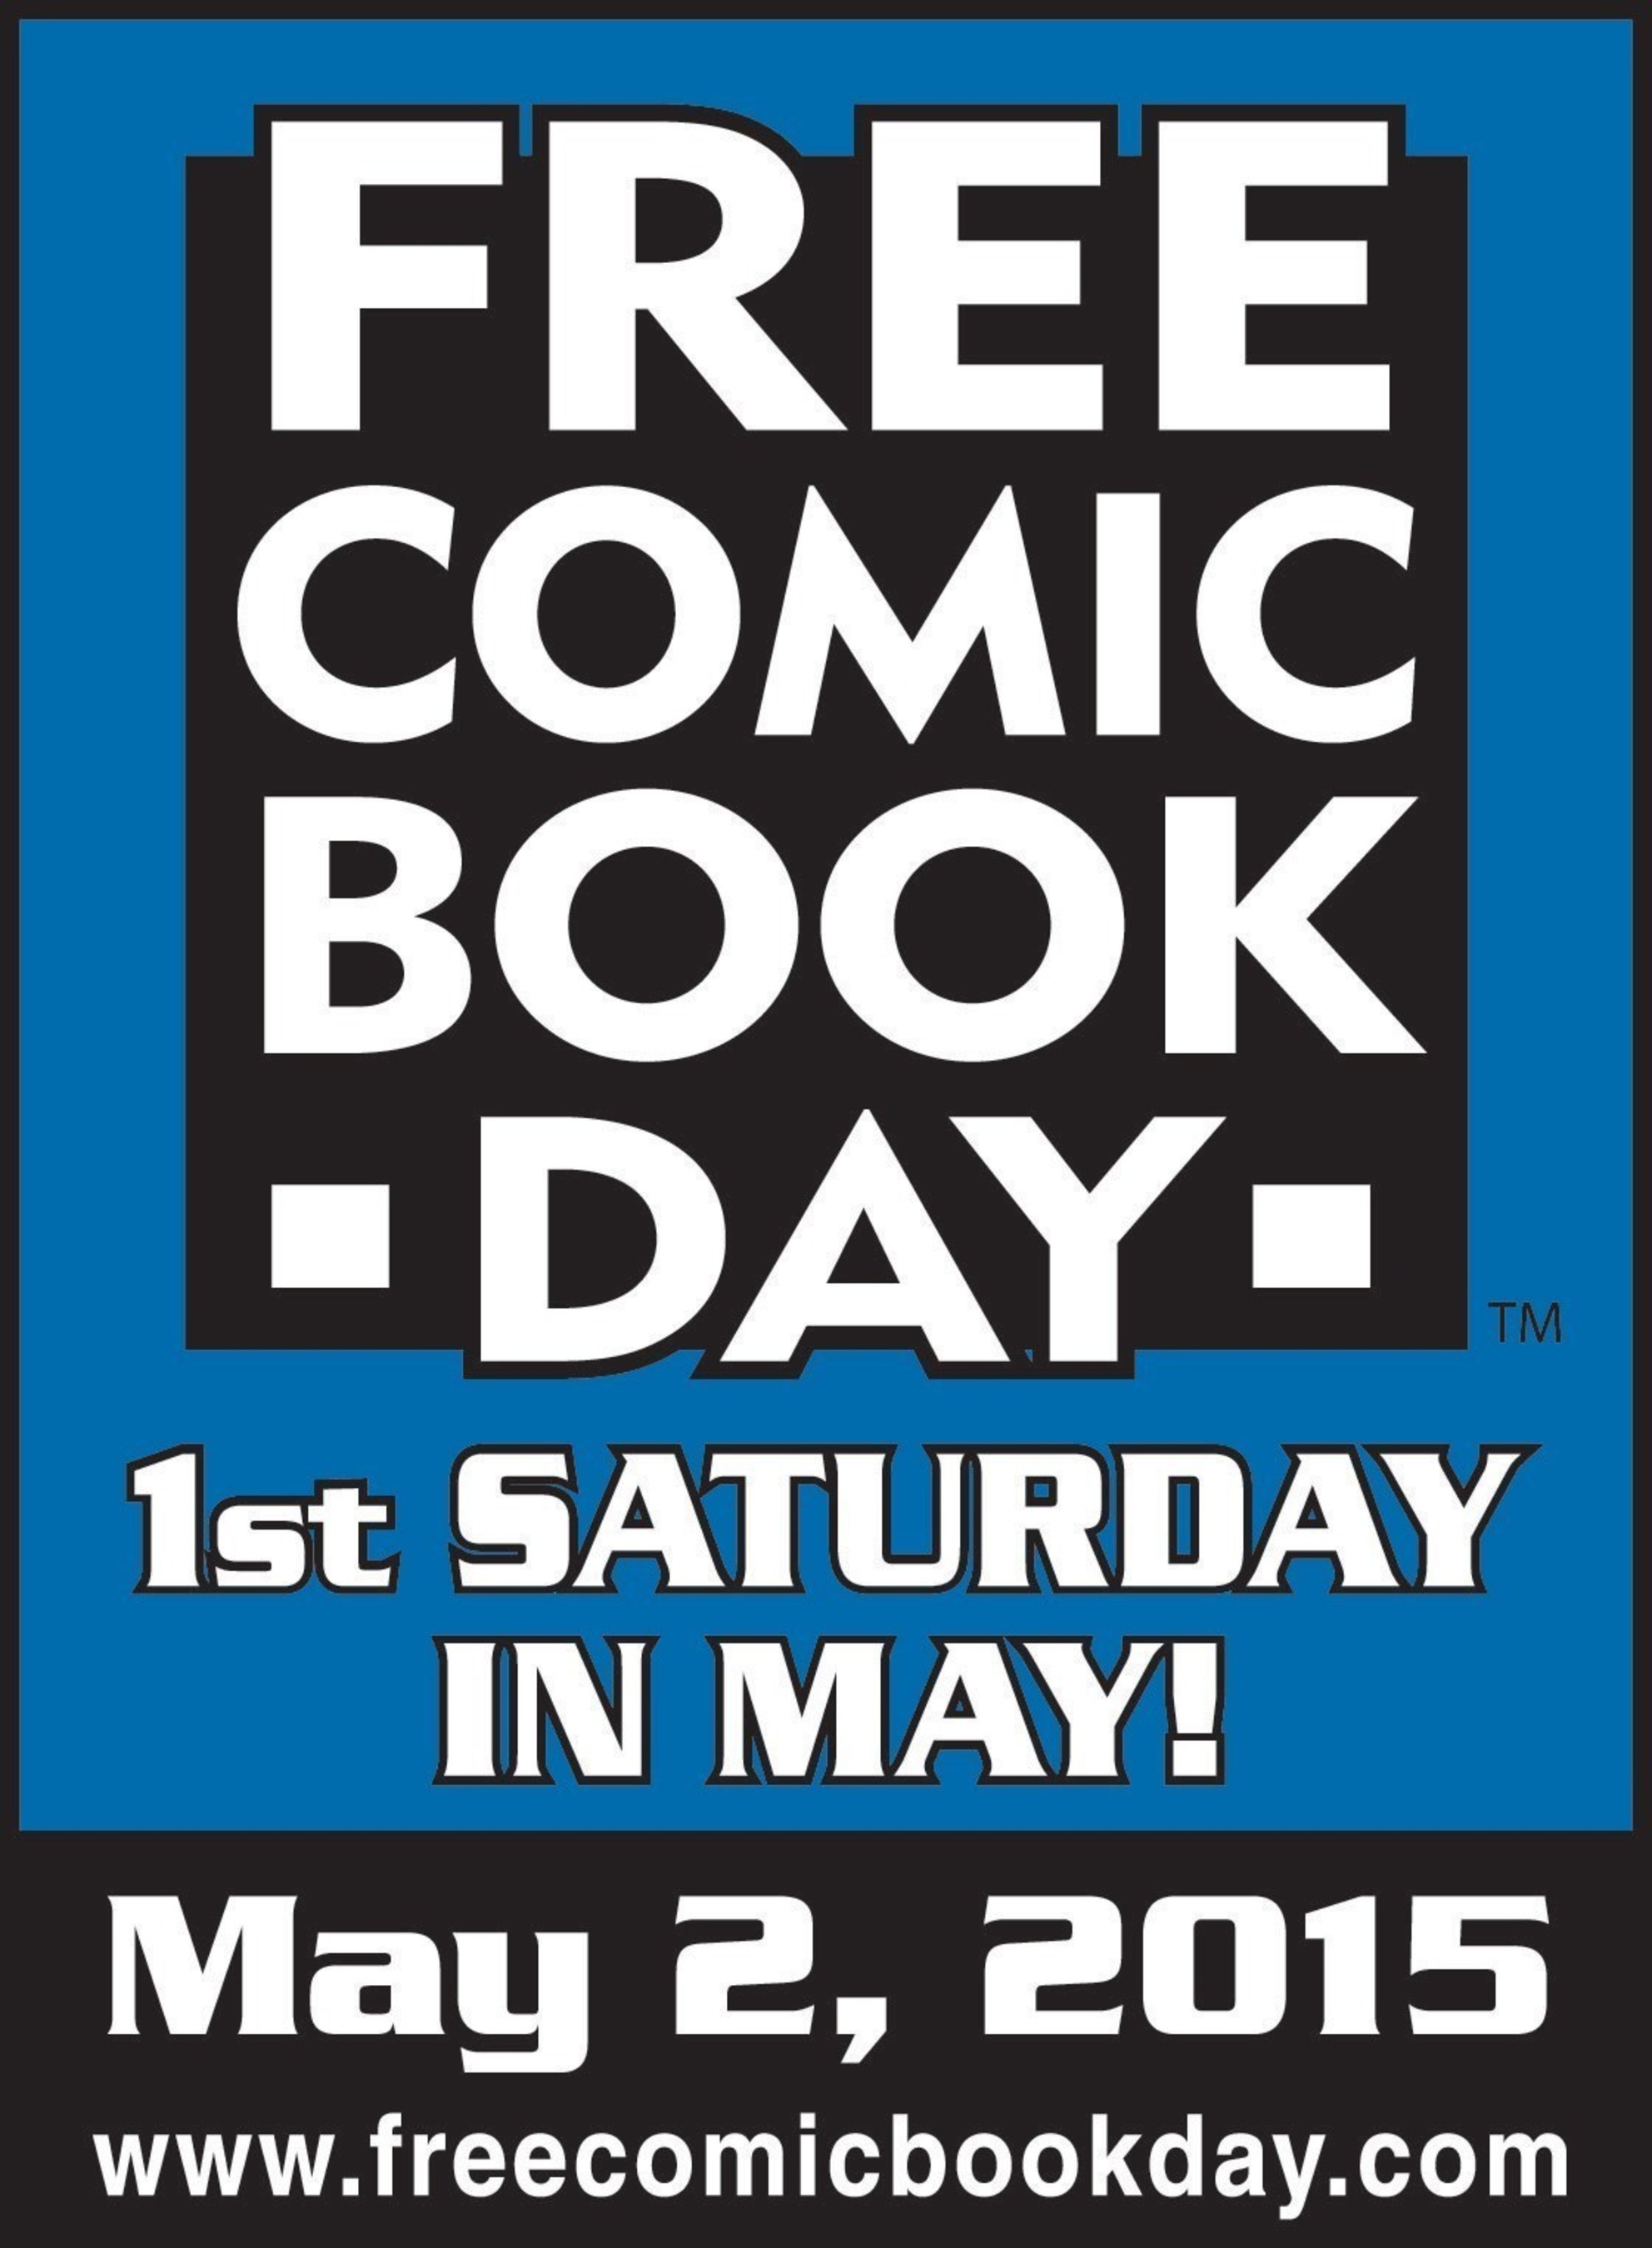 Get free comic books on Saturday, May 2nd at participating comic shops for Free Comic Book Day!